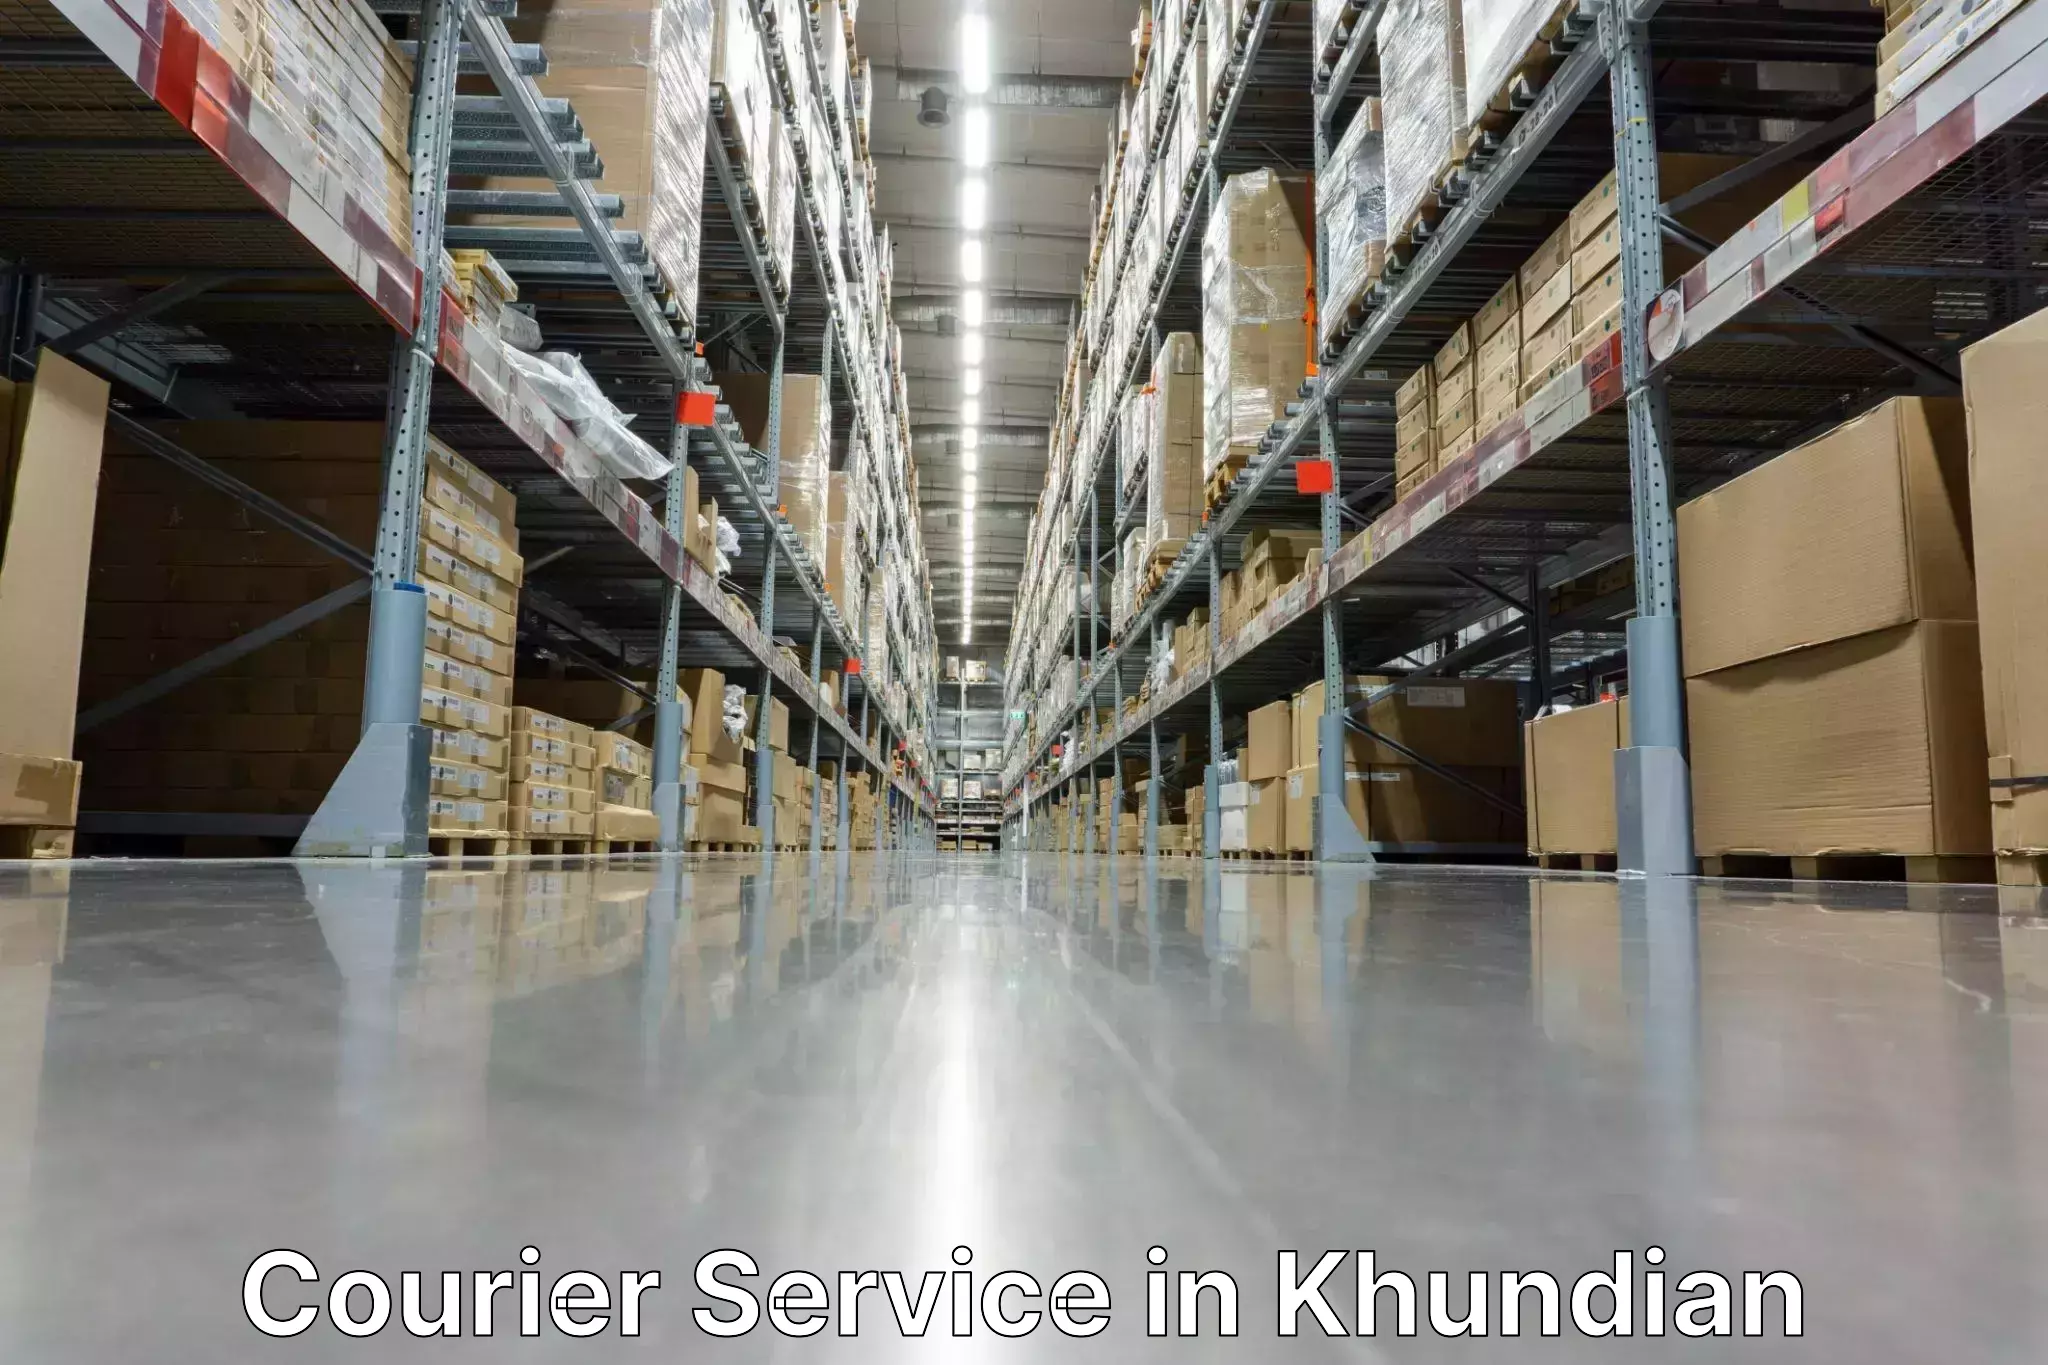 Next-generation courier services in Khundian